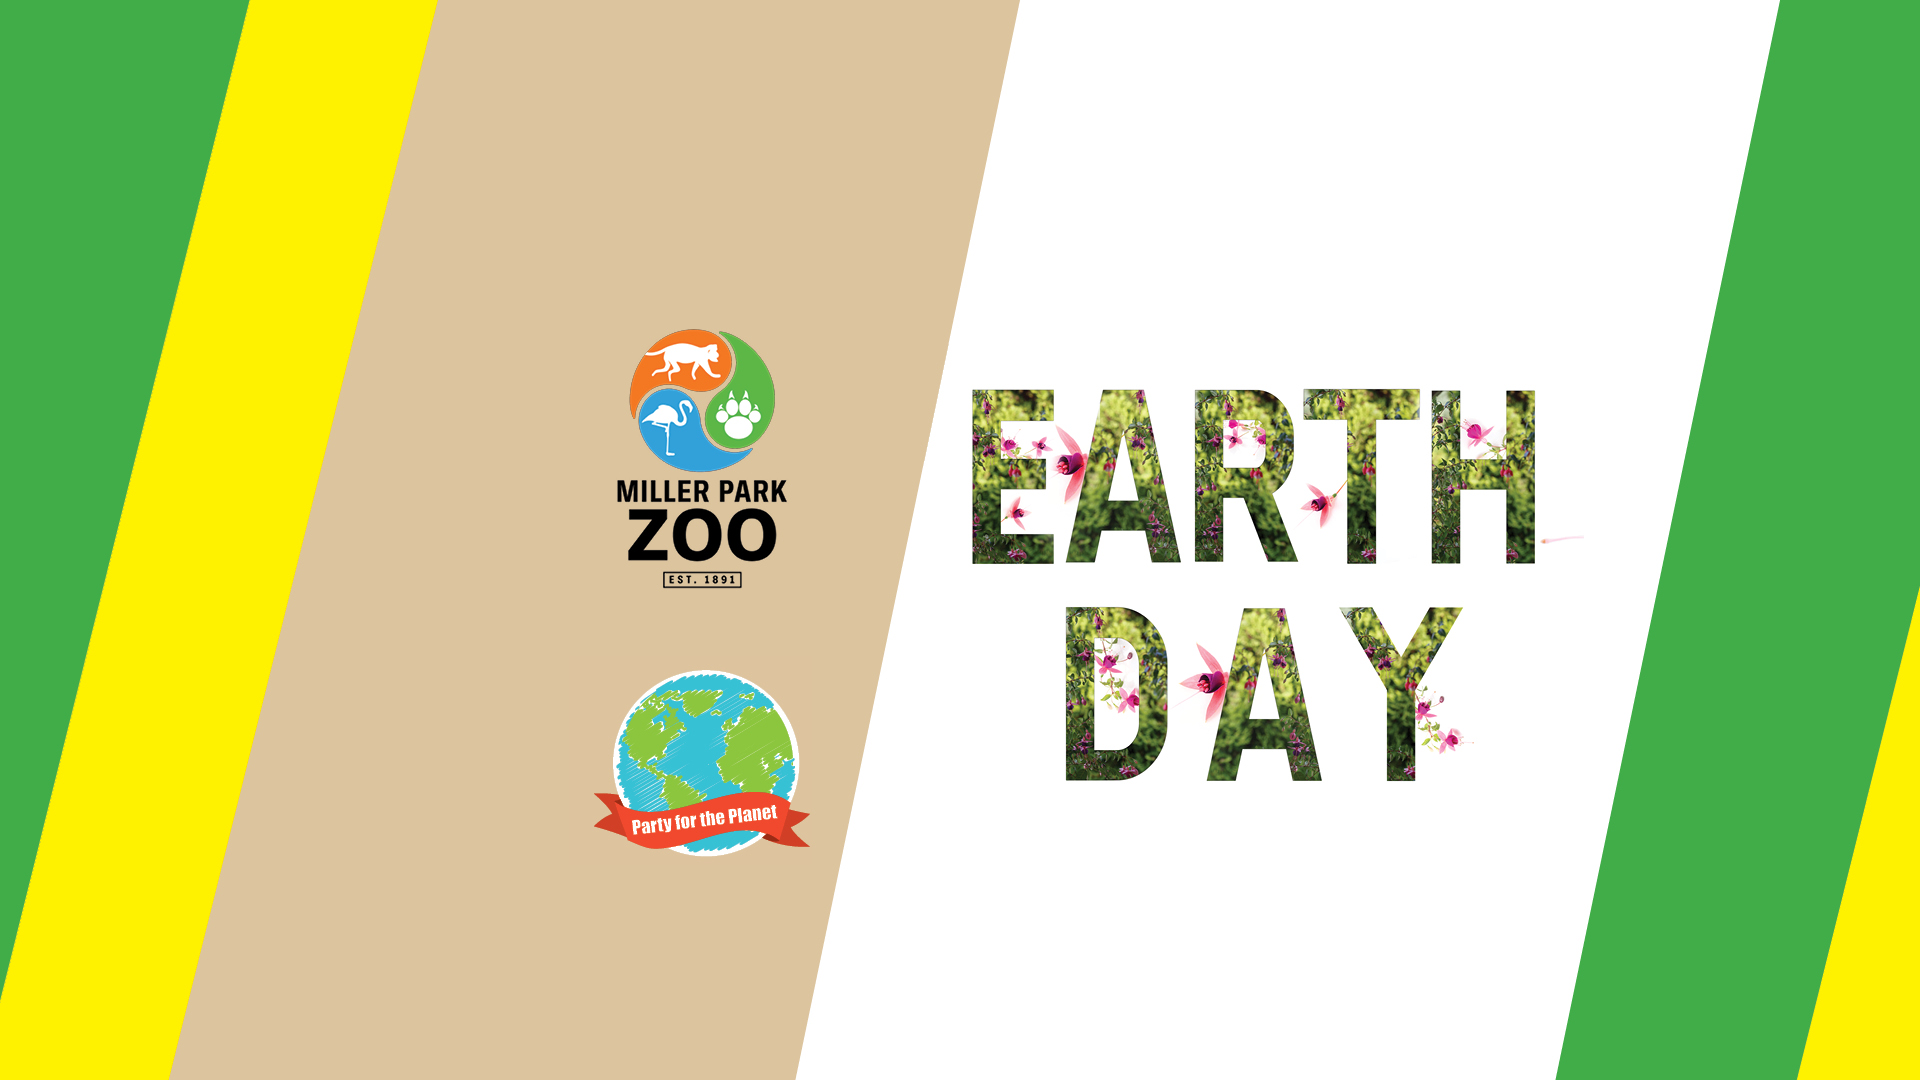 Party for the Planet-Earth Day at the Zoo